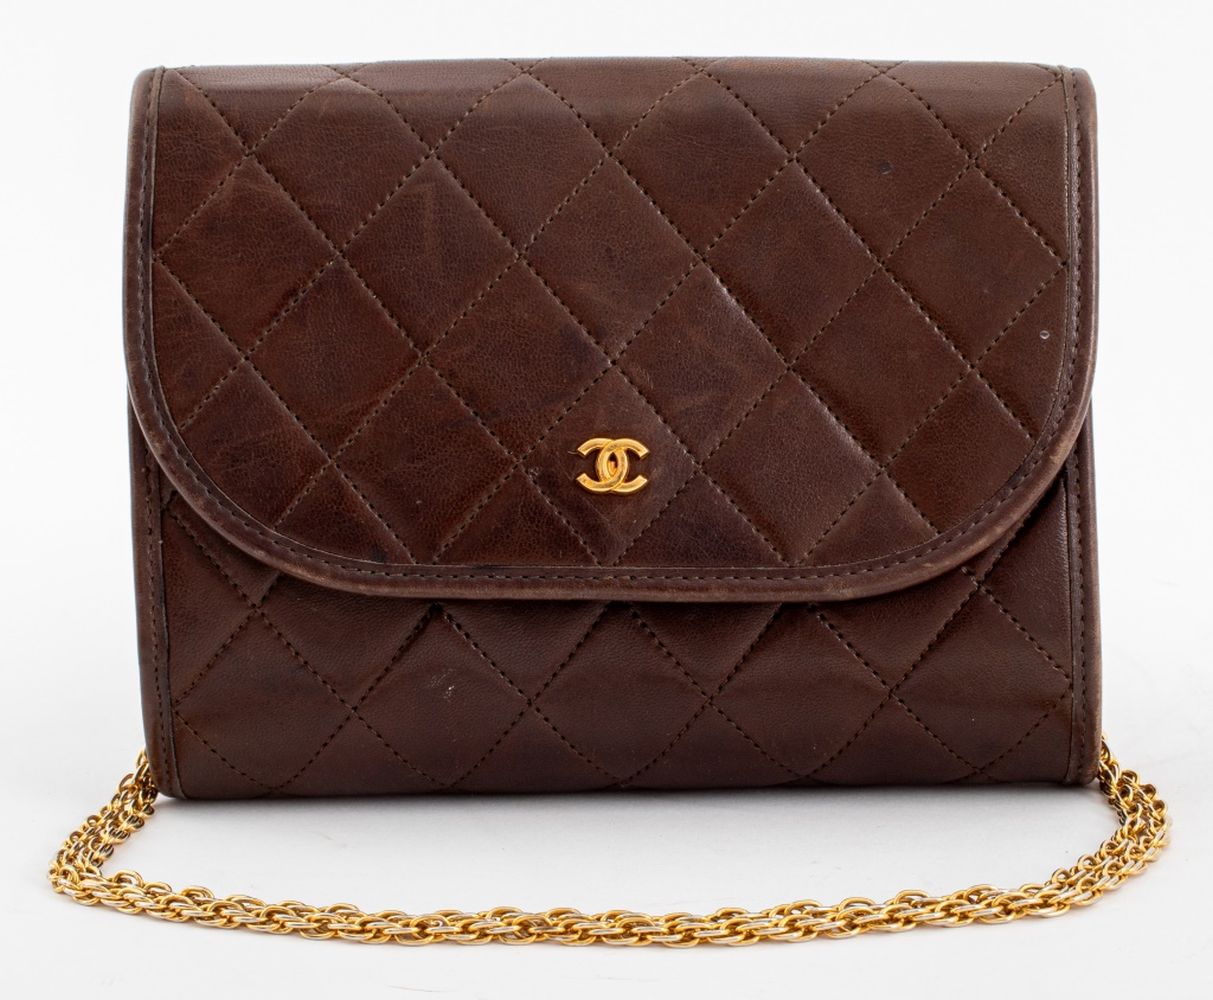 CHANEL QUILTED BROWN LEATHER FRONT 3ce6e0